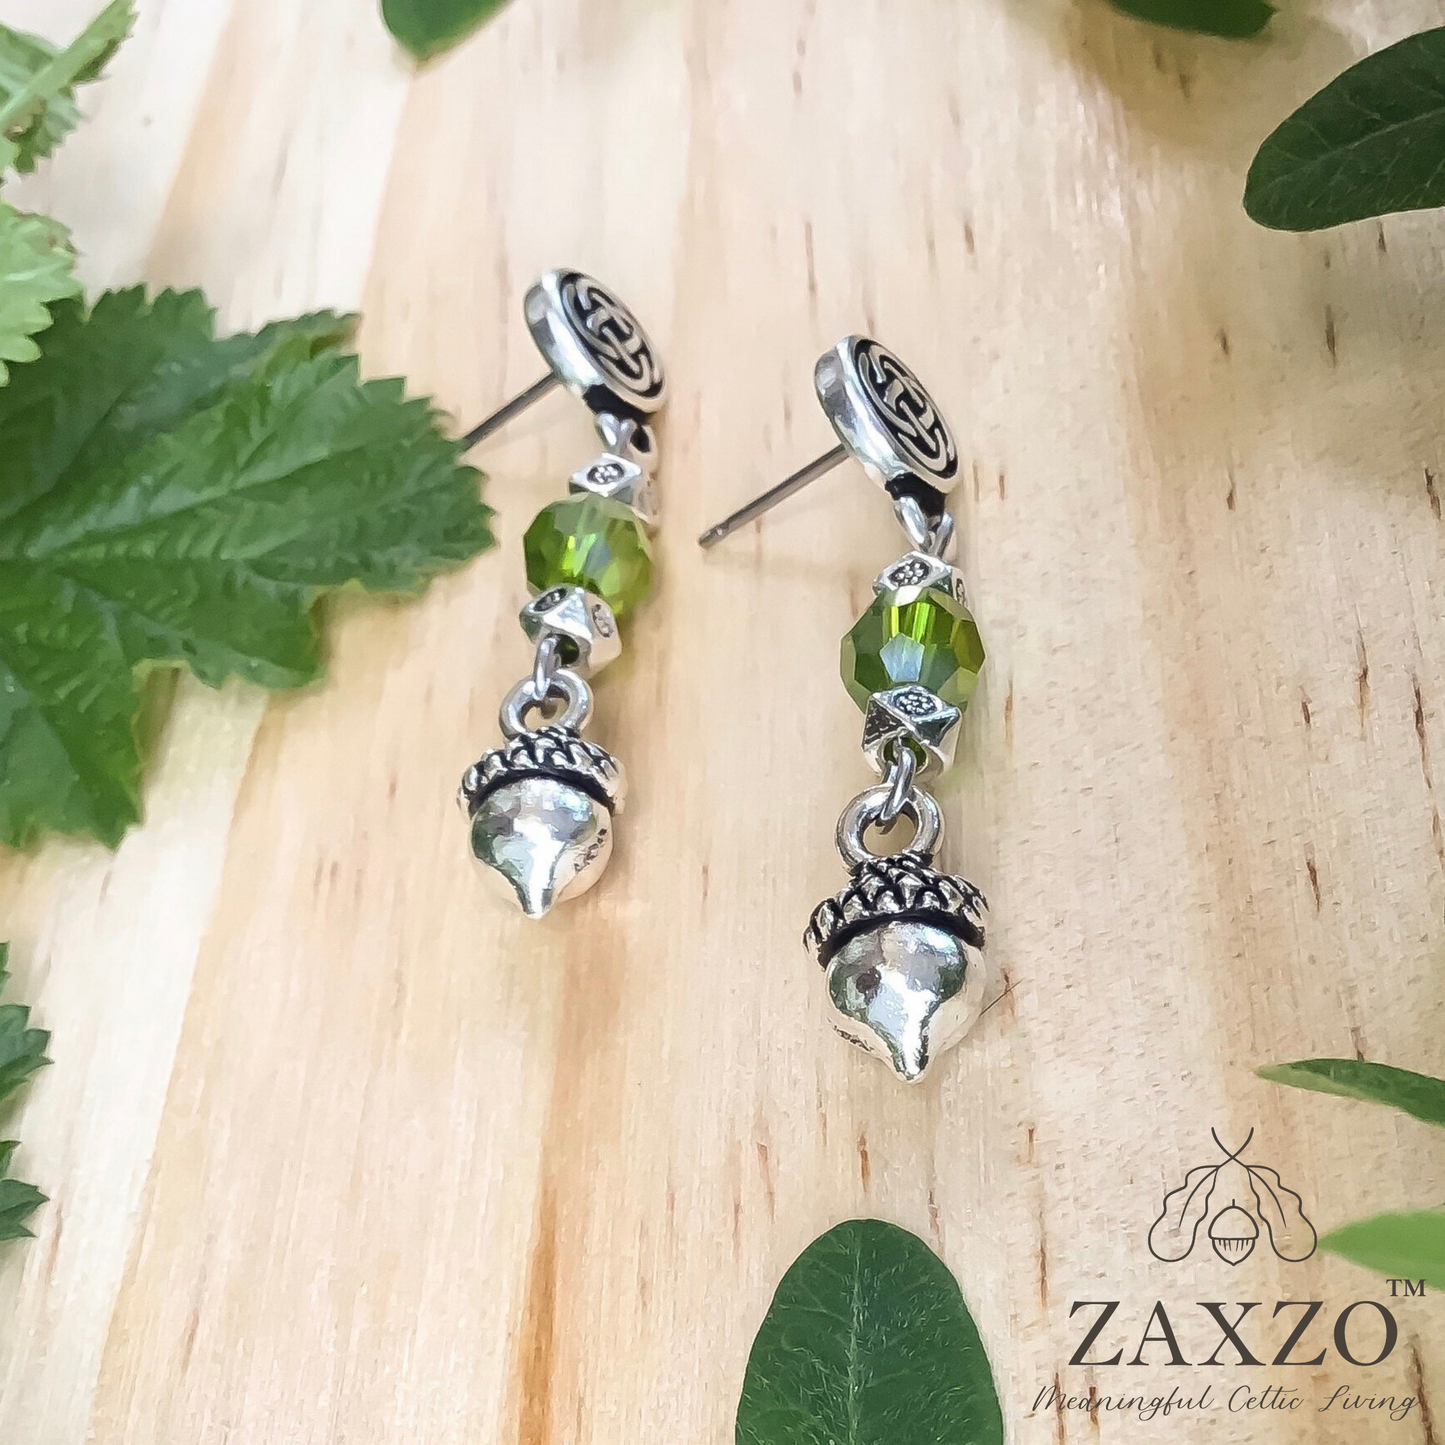 Dainty Acorn Charm Earrings with Green Faceted Czech Beads. Gift Box Included.